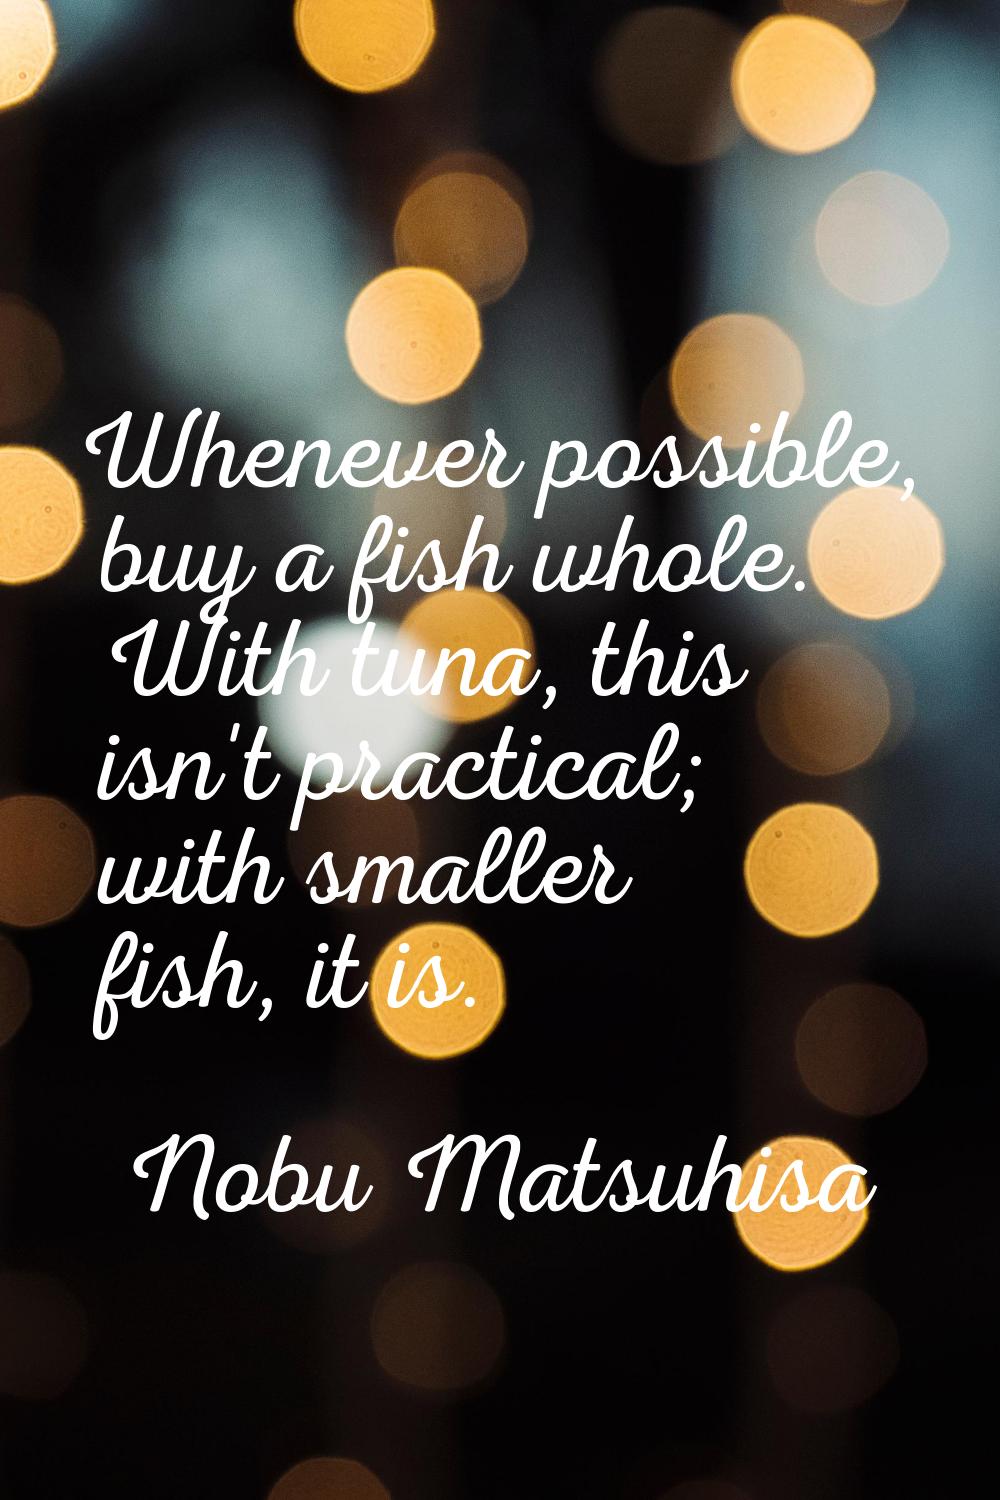 Whenever possible, buy a fish whole. With tuna, this isn't practical; with smaller fish, it is.